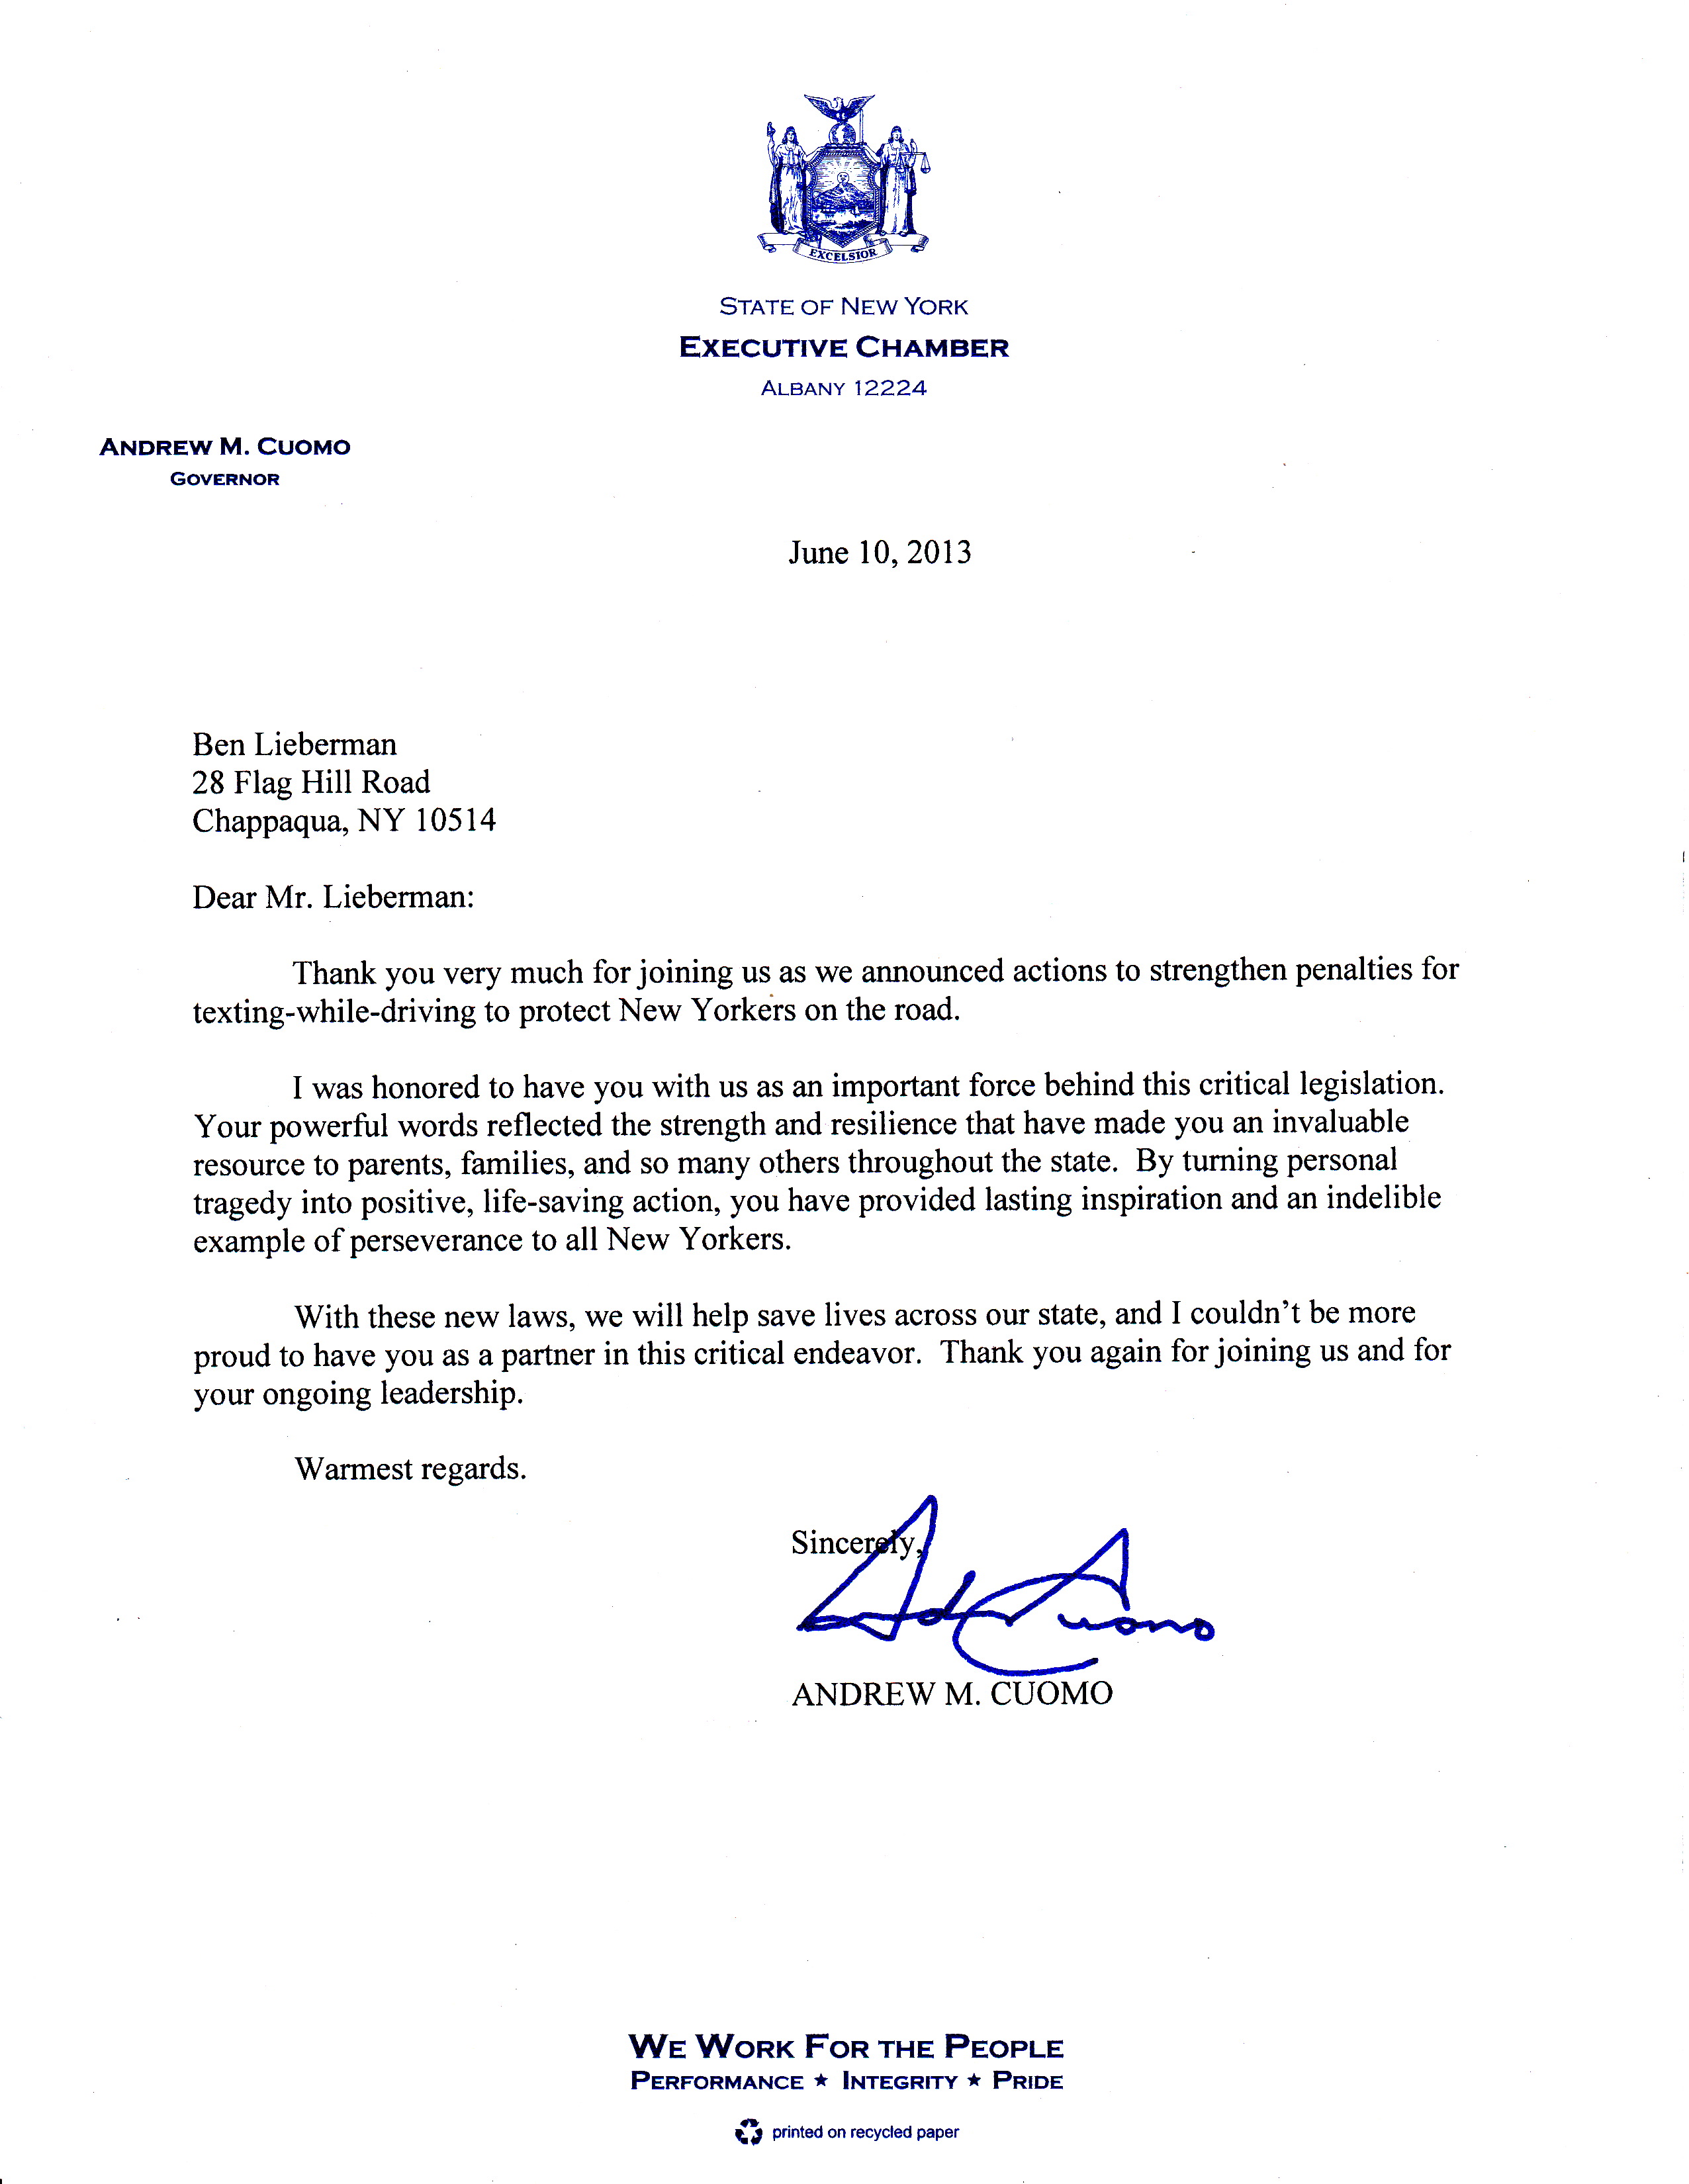 Letter from Cuomo